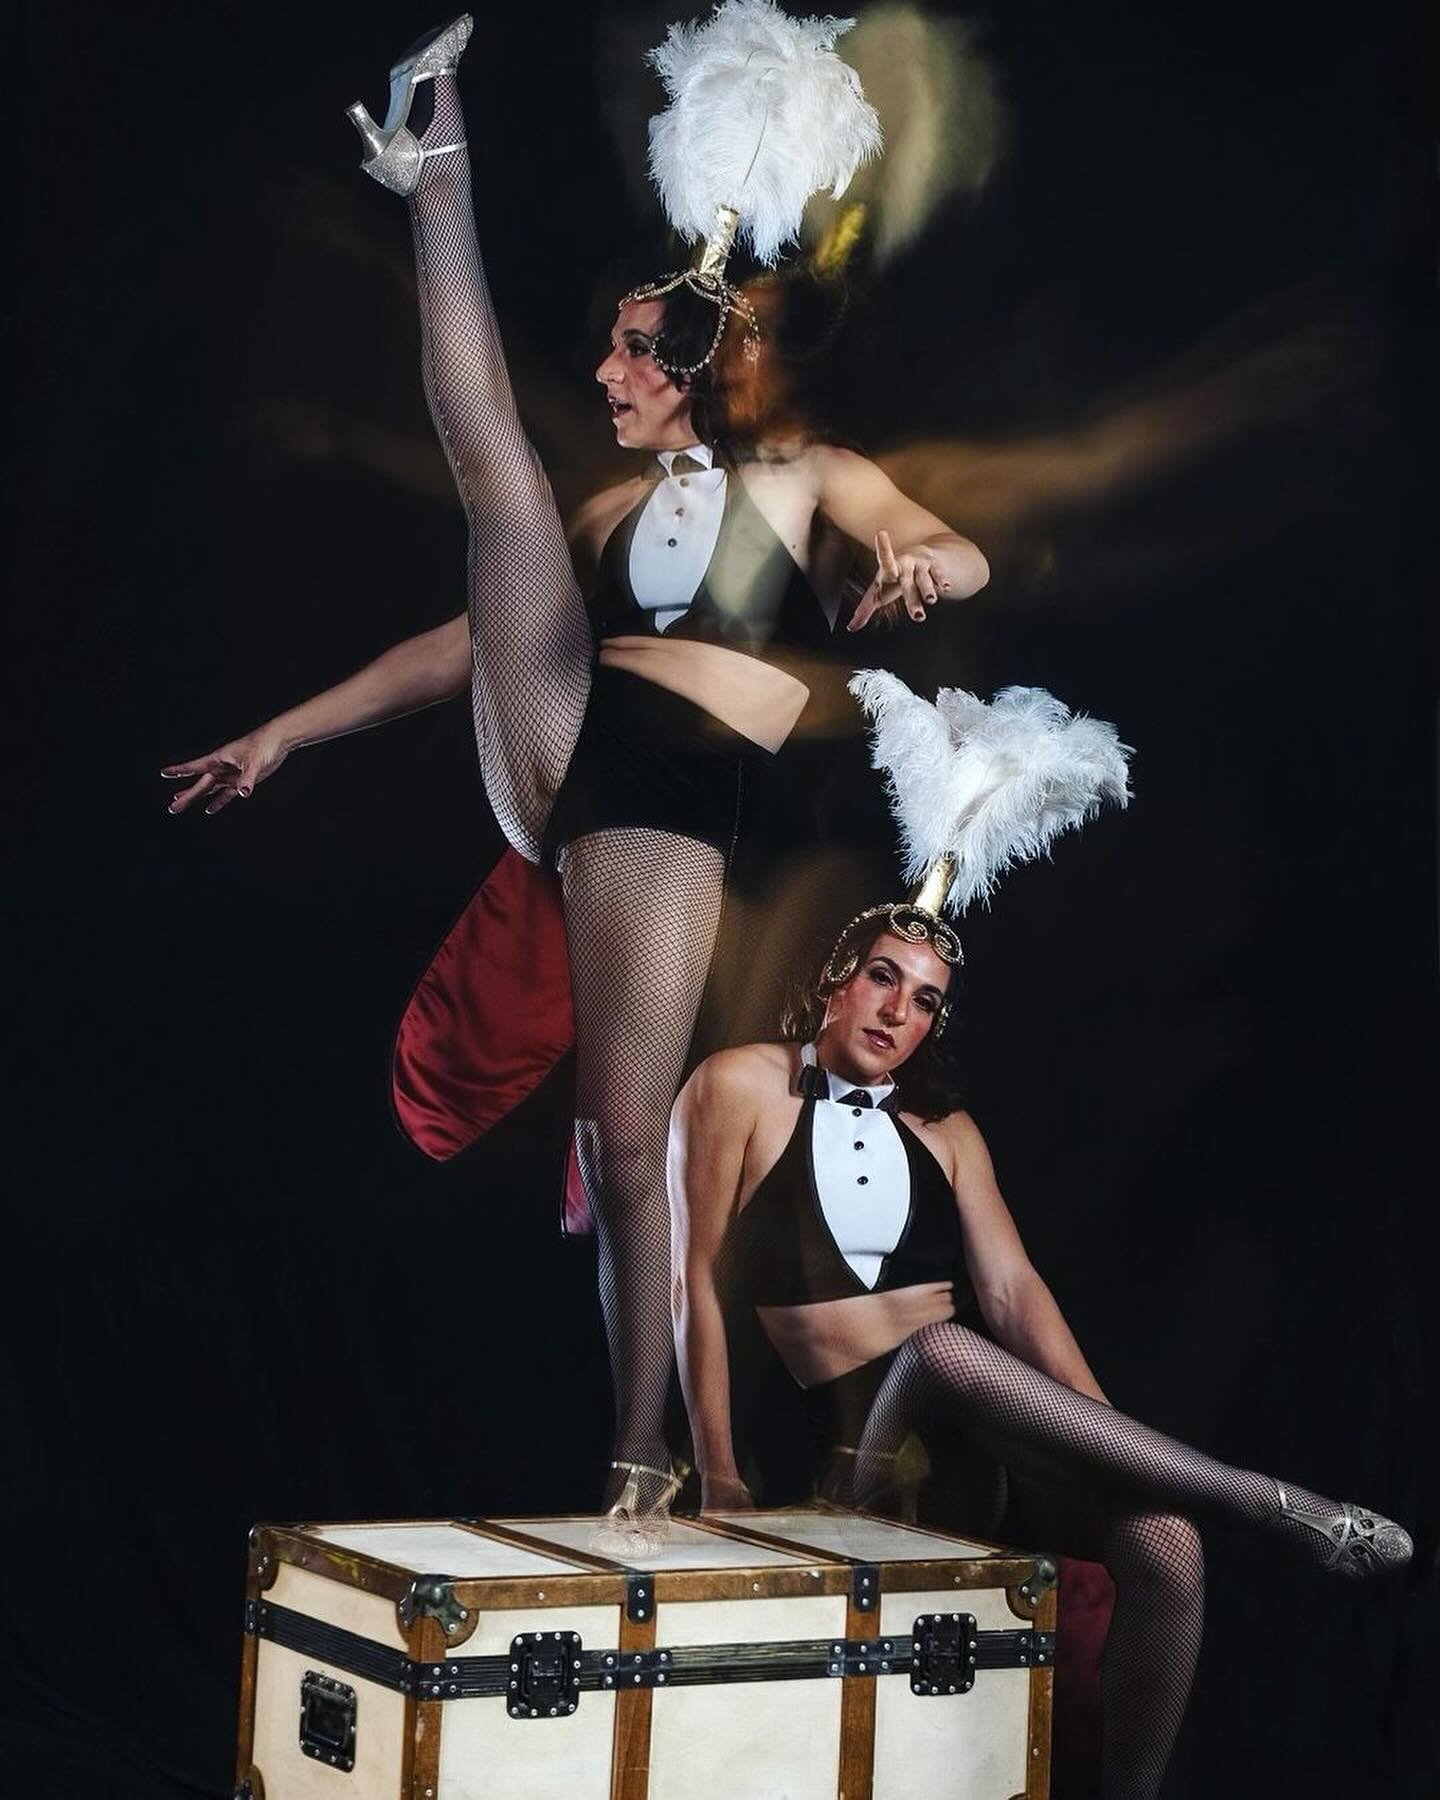 Vaudeville Revival! A show that has it ALL: Witness old world circus for ONE showing only on May 26th: New production, NEW acts featuring our spectacular Vaudevillian ensemble hailing from near and far. 🎟️ Seating, especially our VIP Cabaret tables,